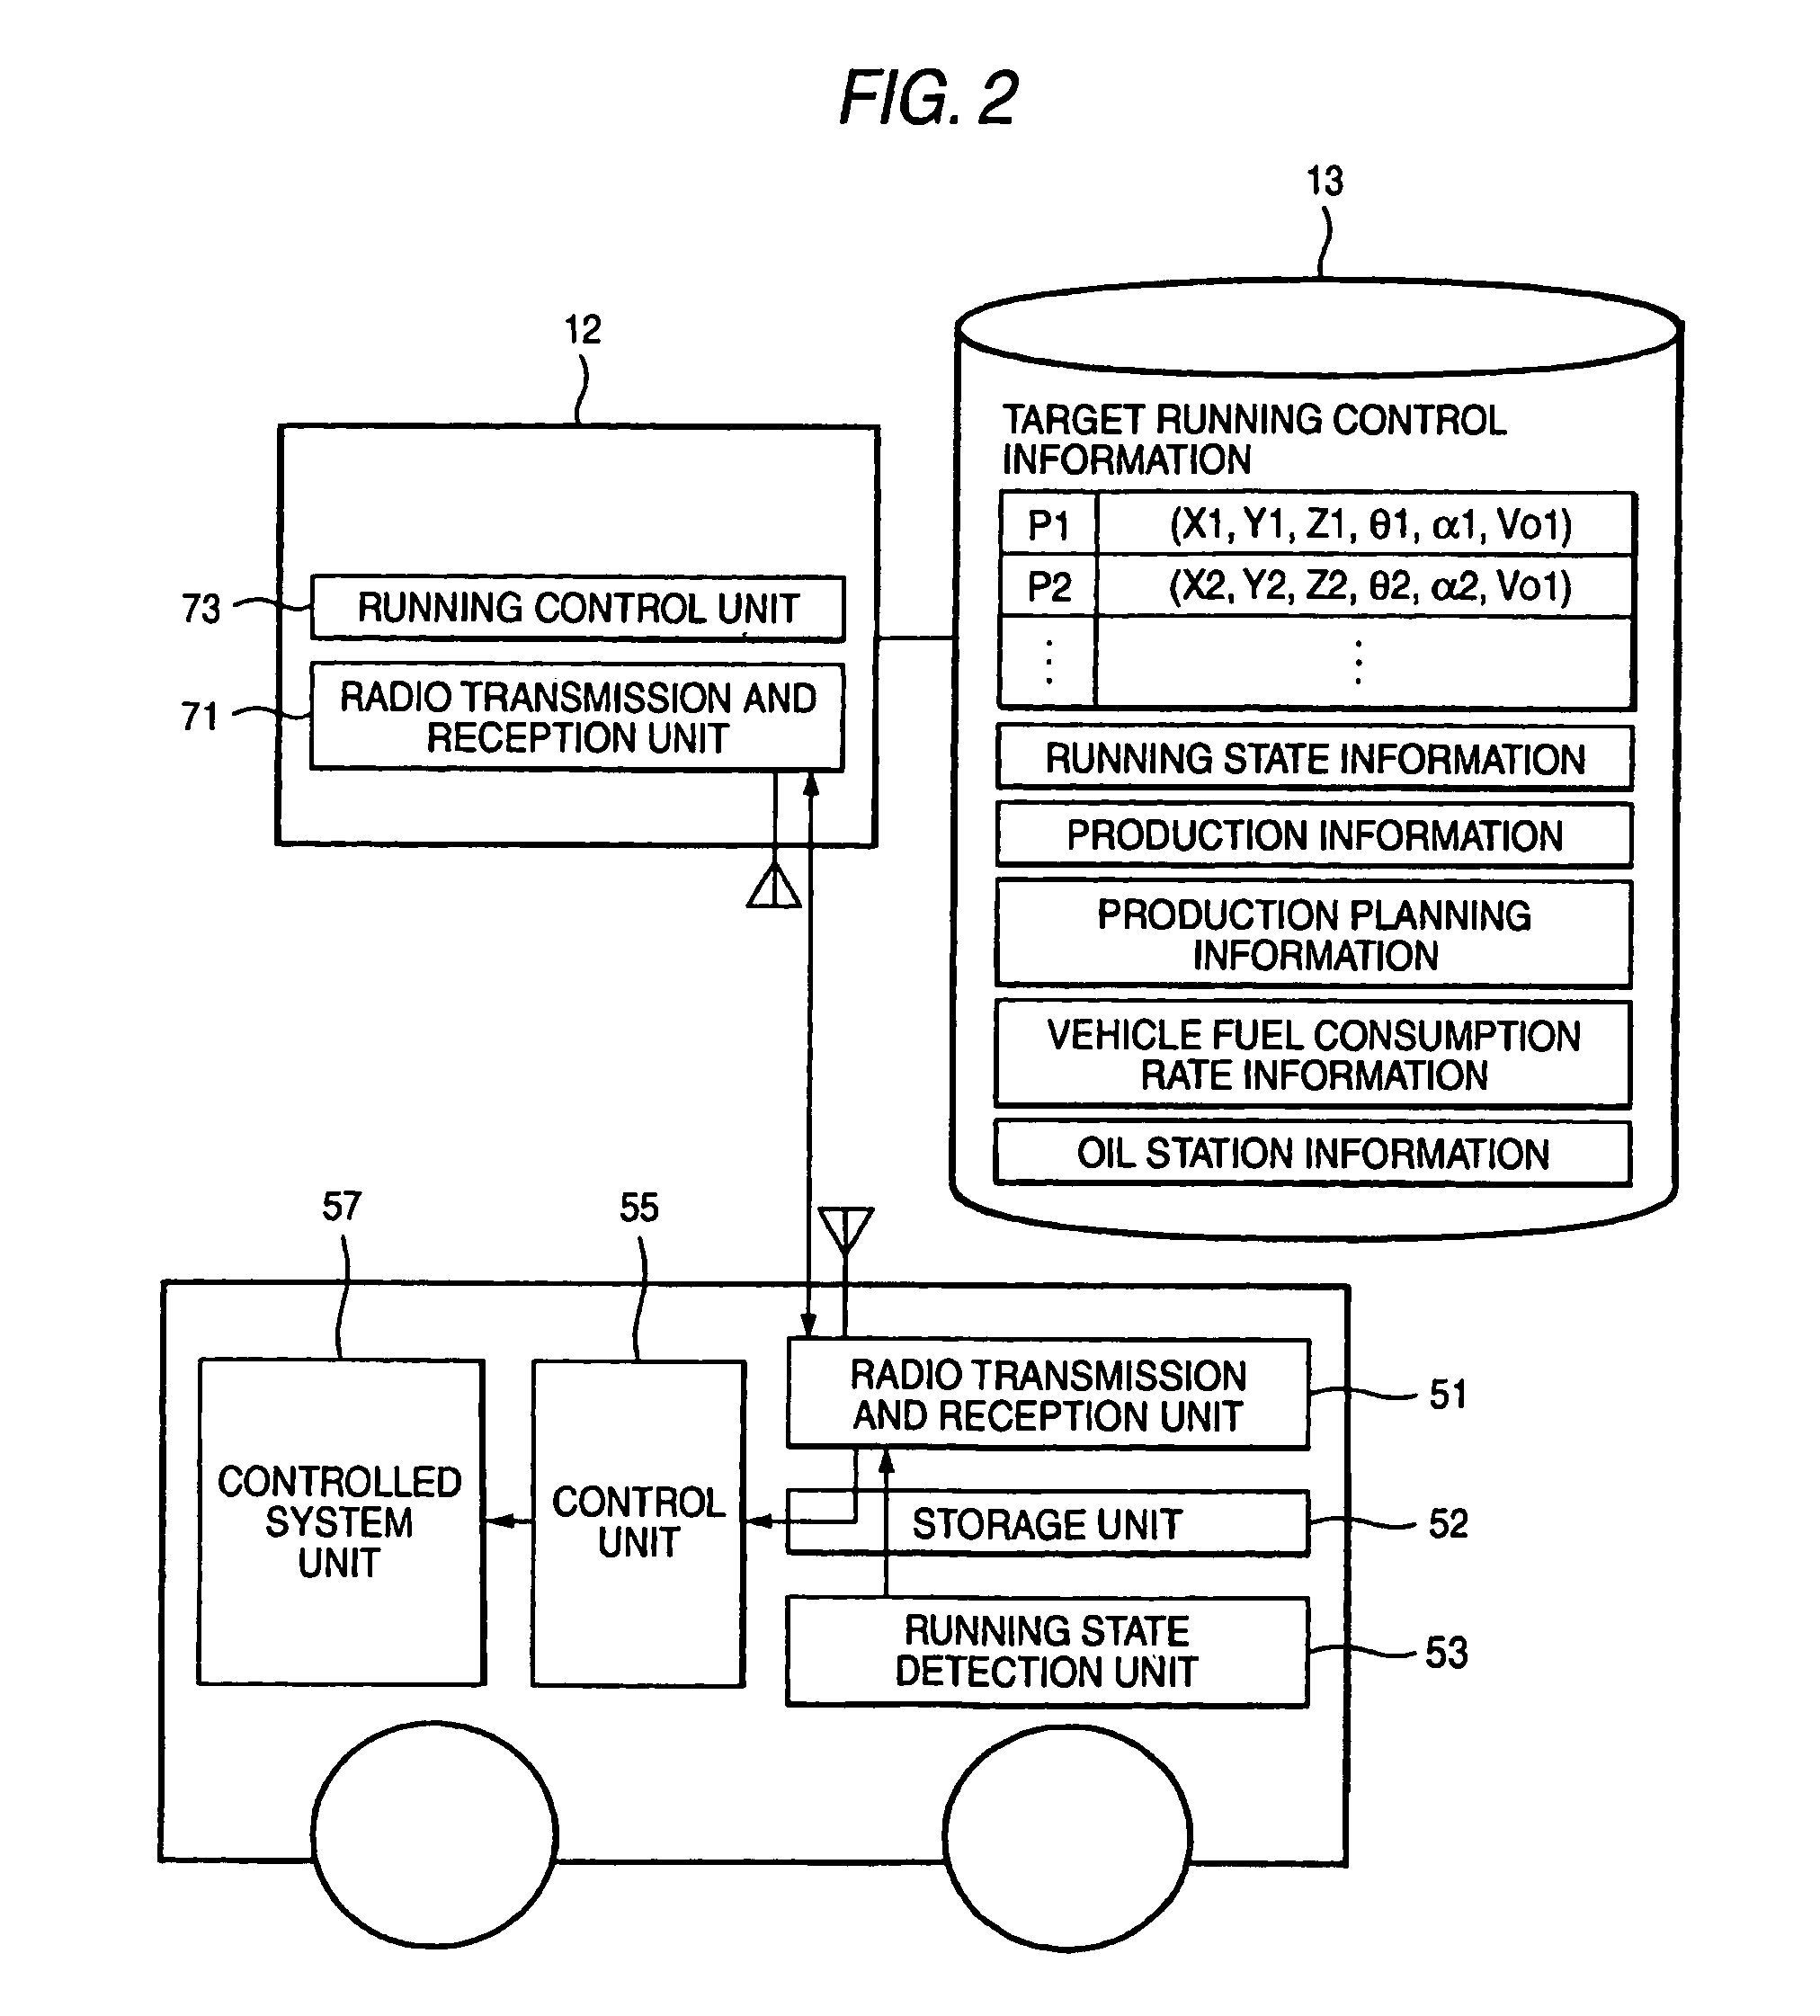 Maintenance scheduling apparatus and method therefor